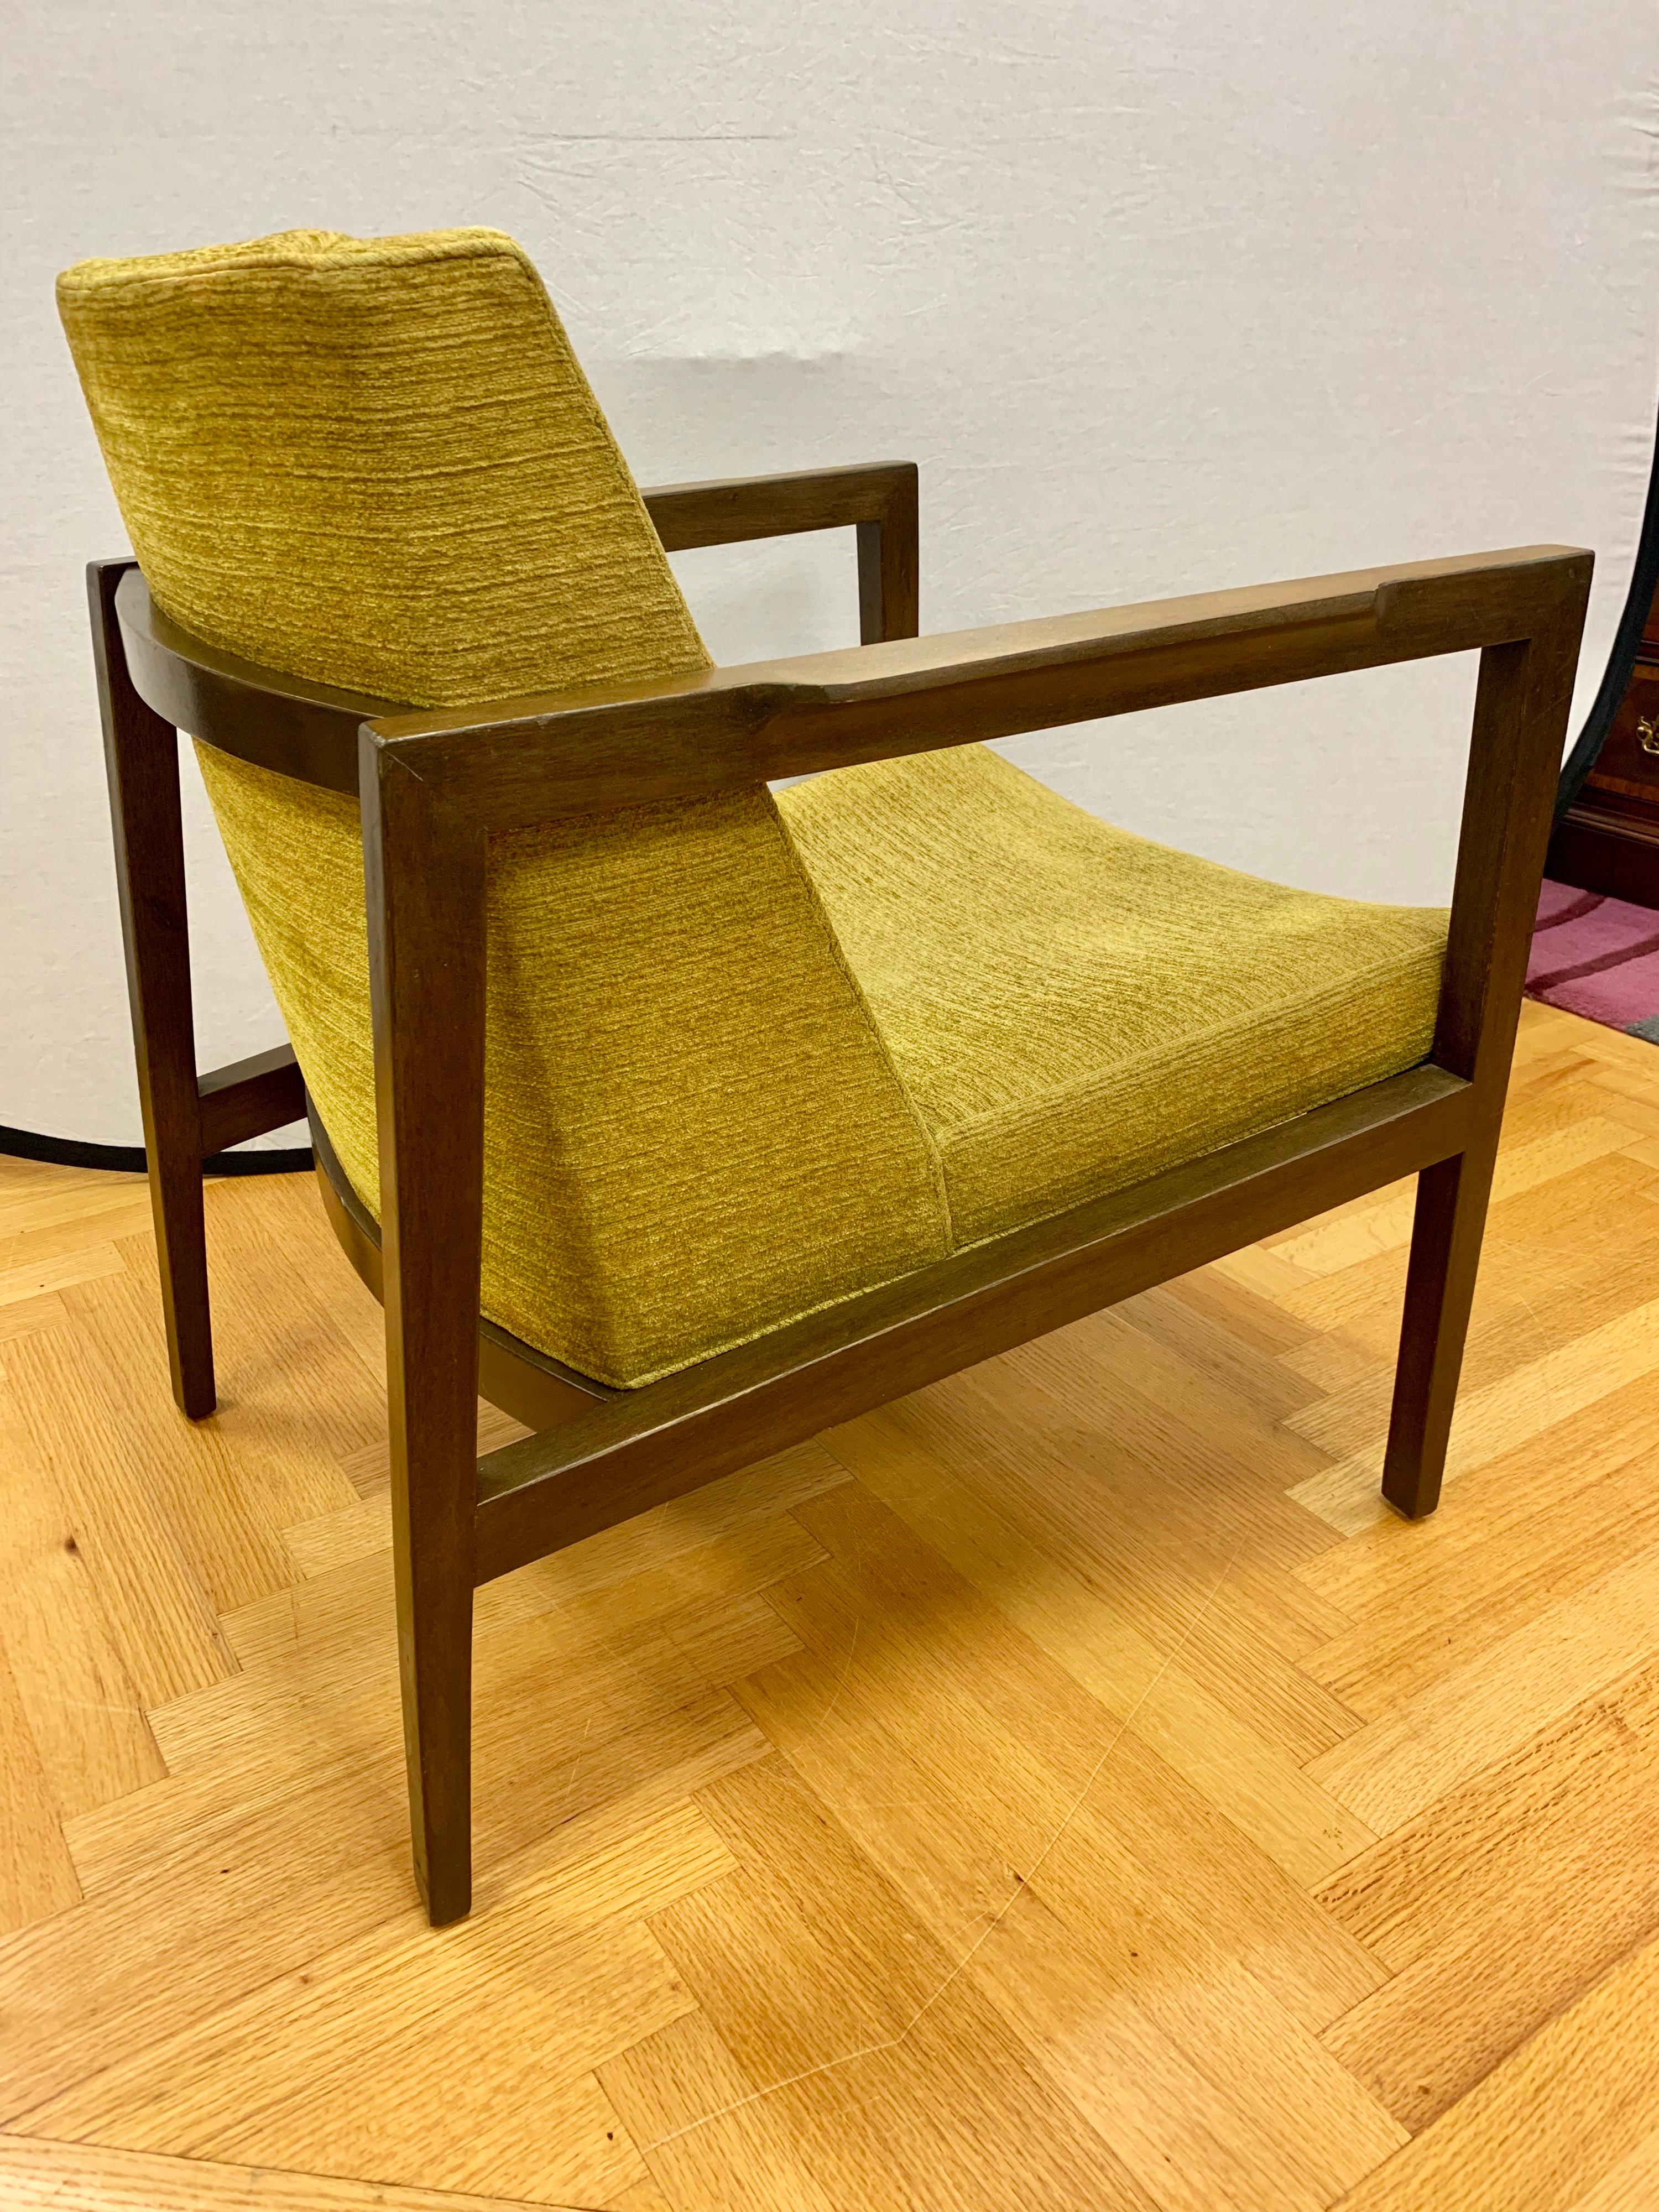 Add a pop of color to your mid century decor with this chartreuse colored arm chair by Edward Wormley for Dunbar. It’s simple and clean lines are a true example of the mid century era. Circa 1950’s with Dunbar hallmarks on bottom.
  